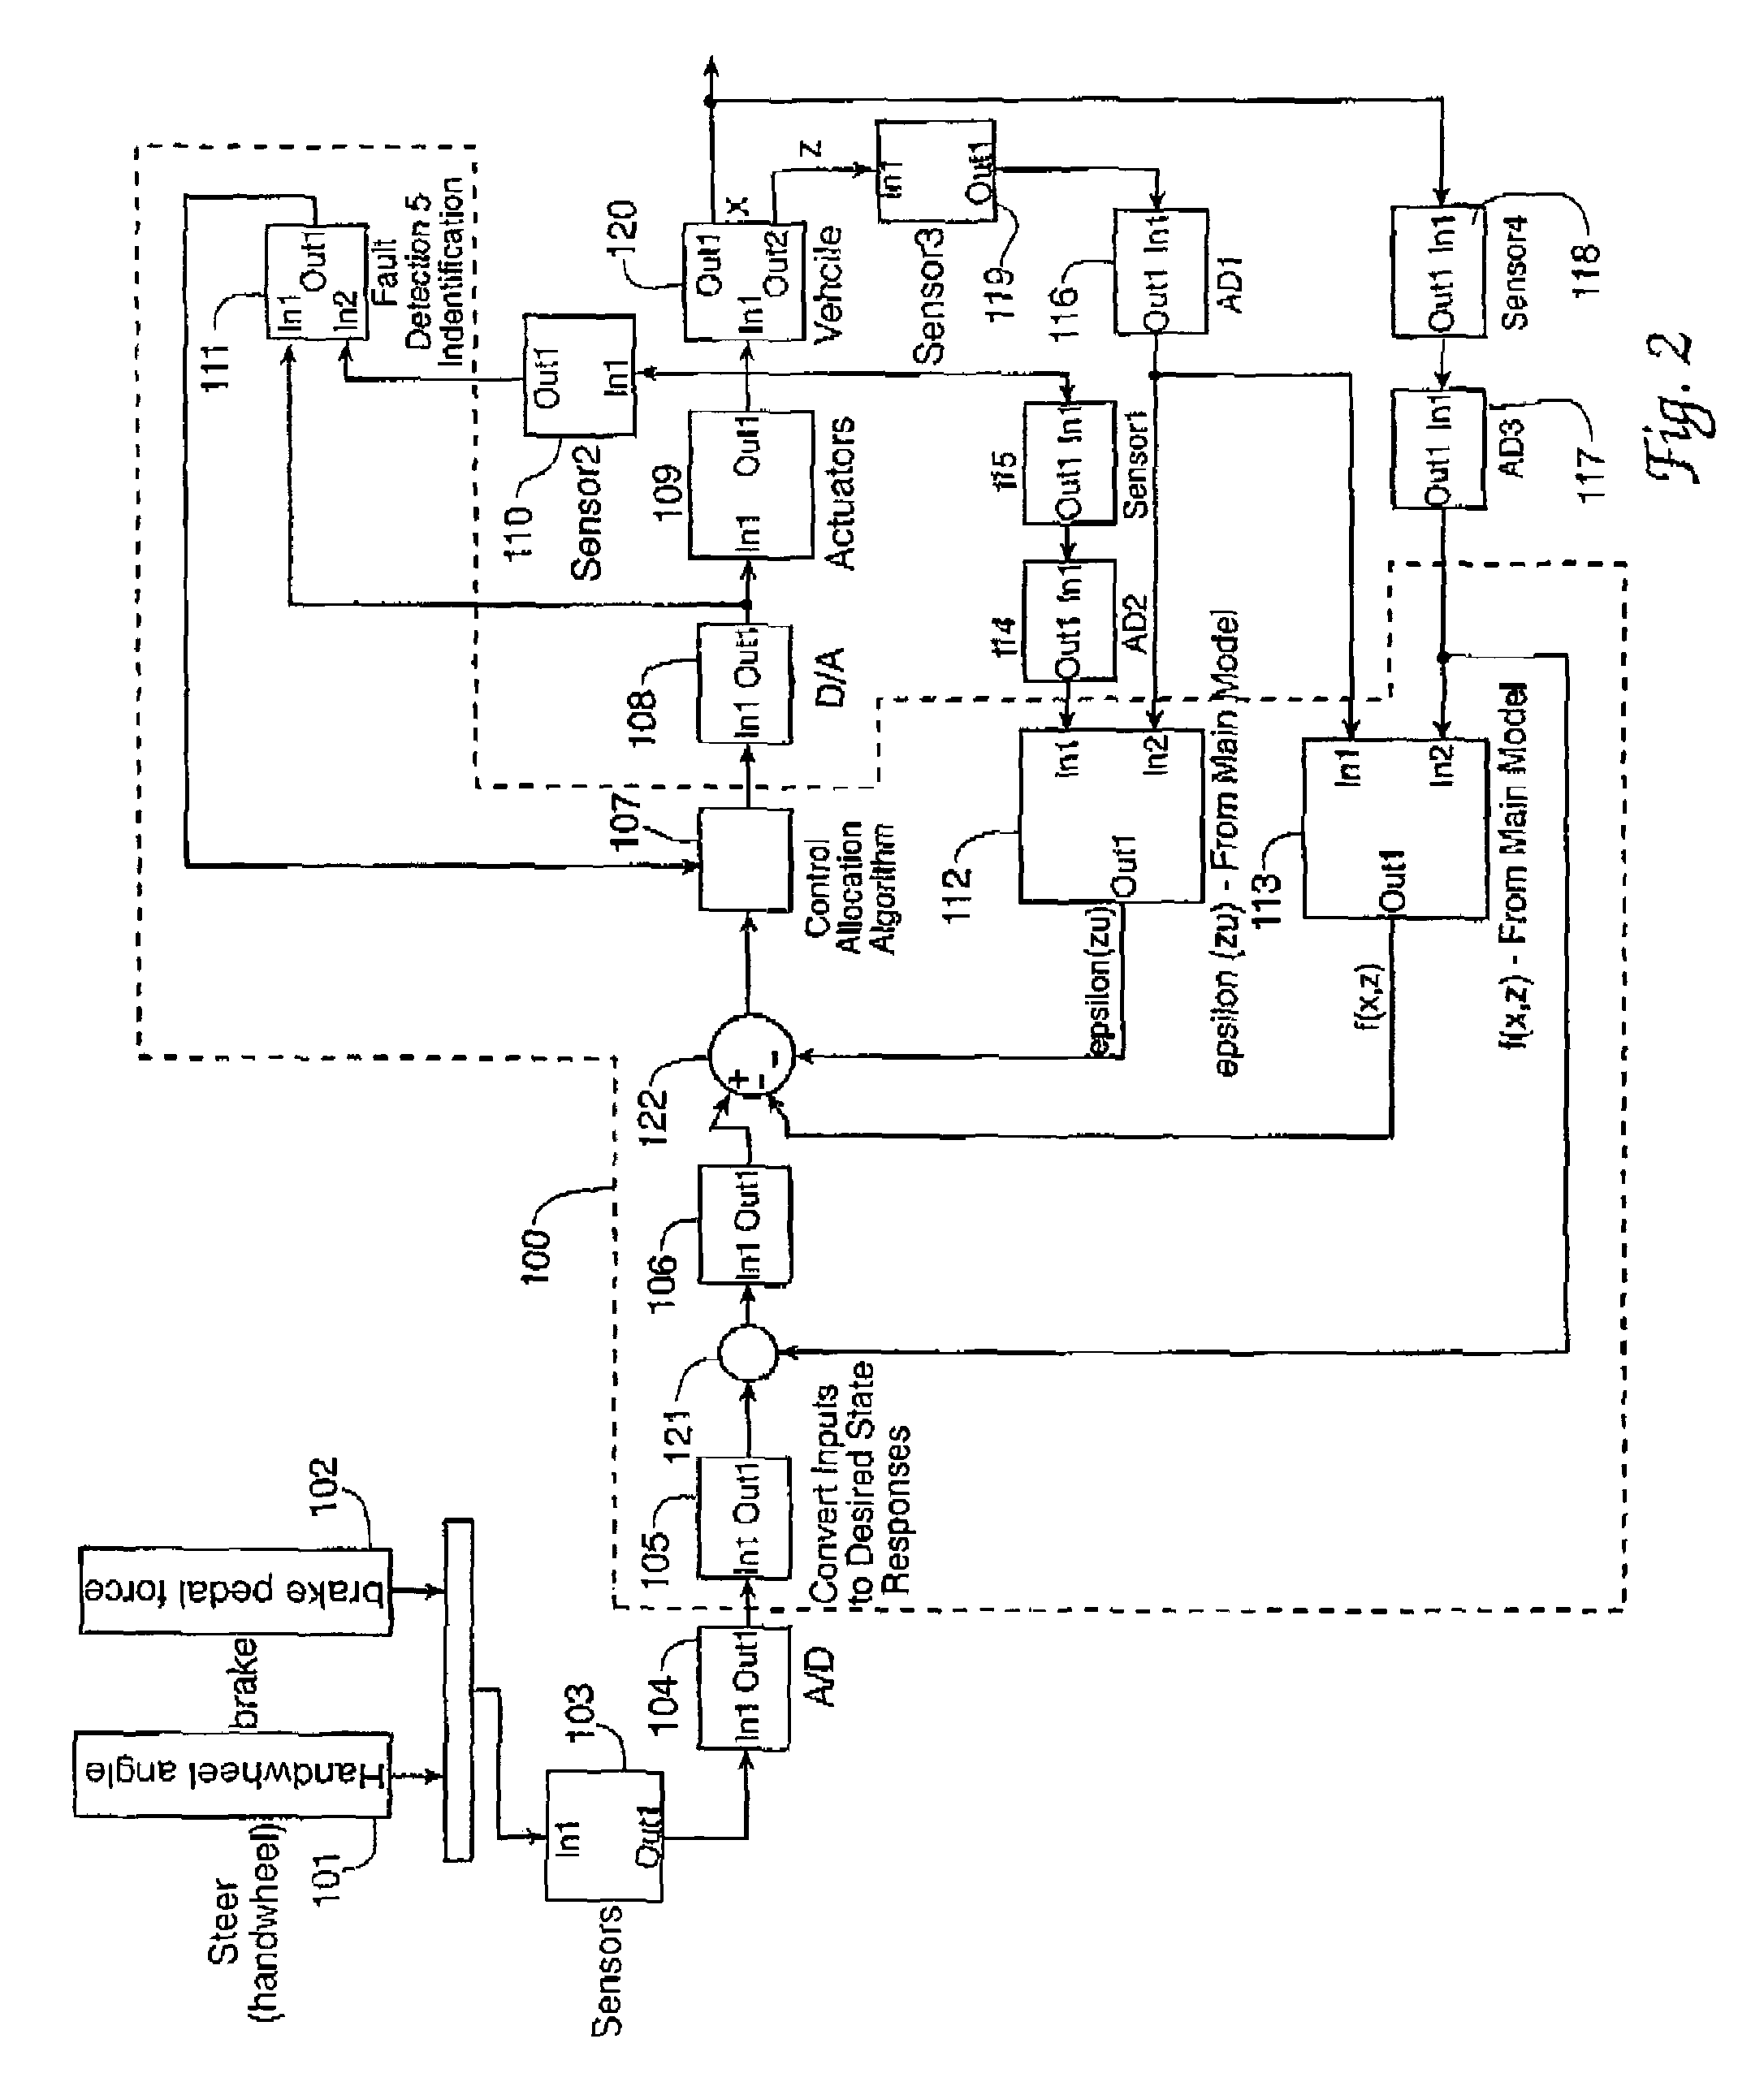 Integrated control of brake and steer by wire system using optimal control allocation methods